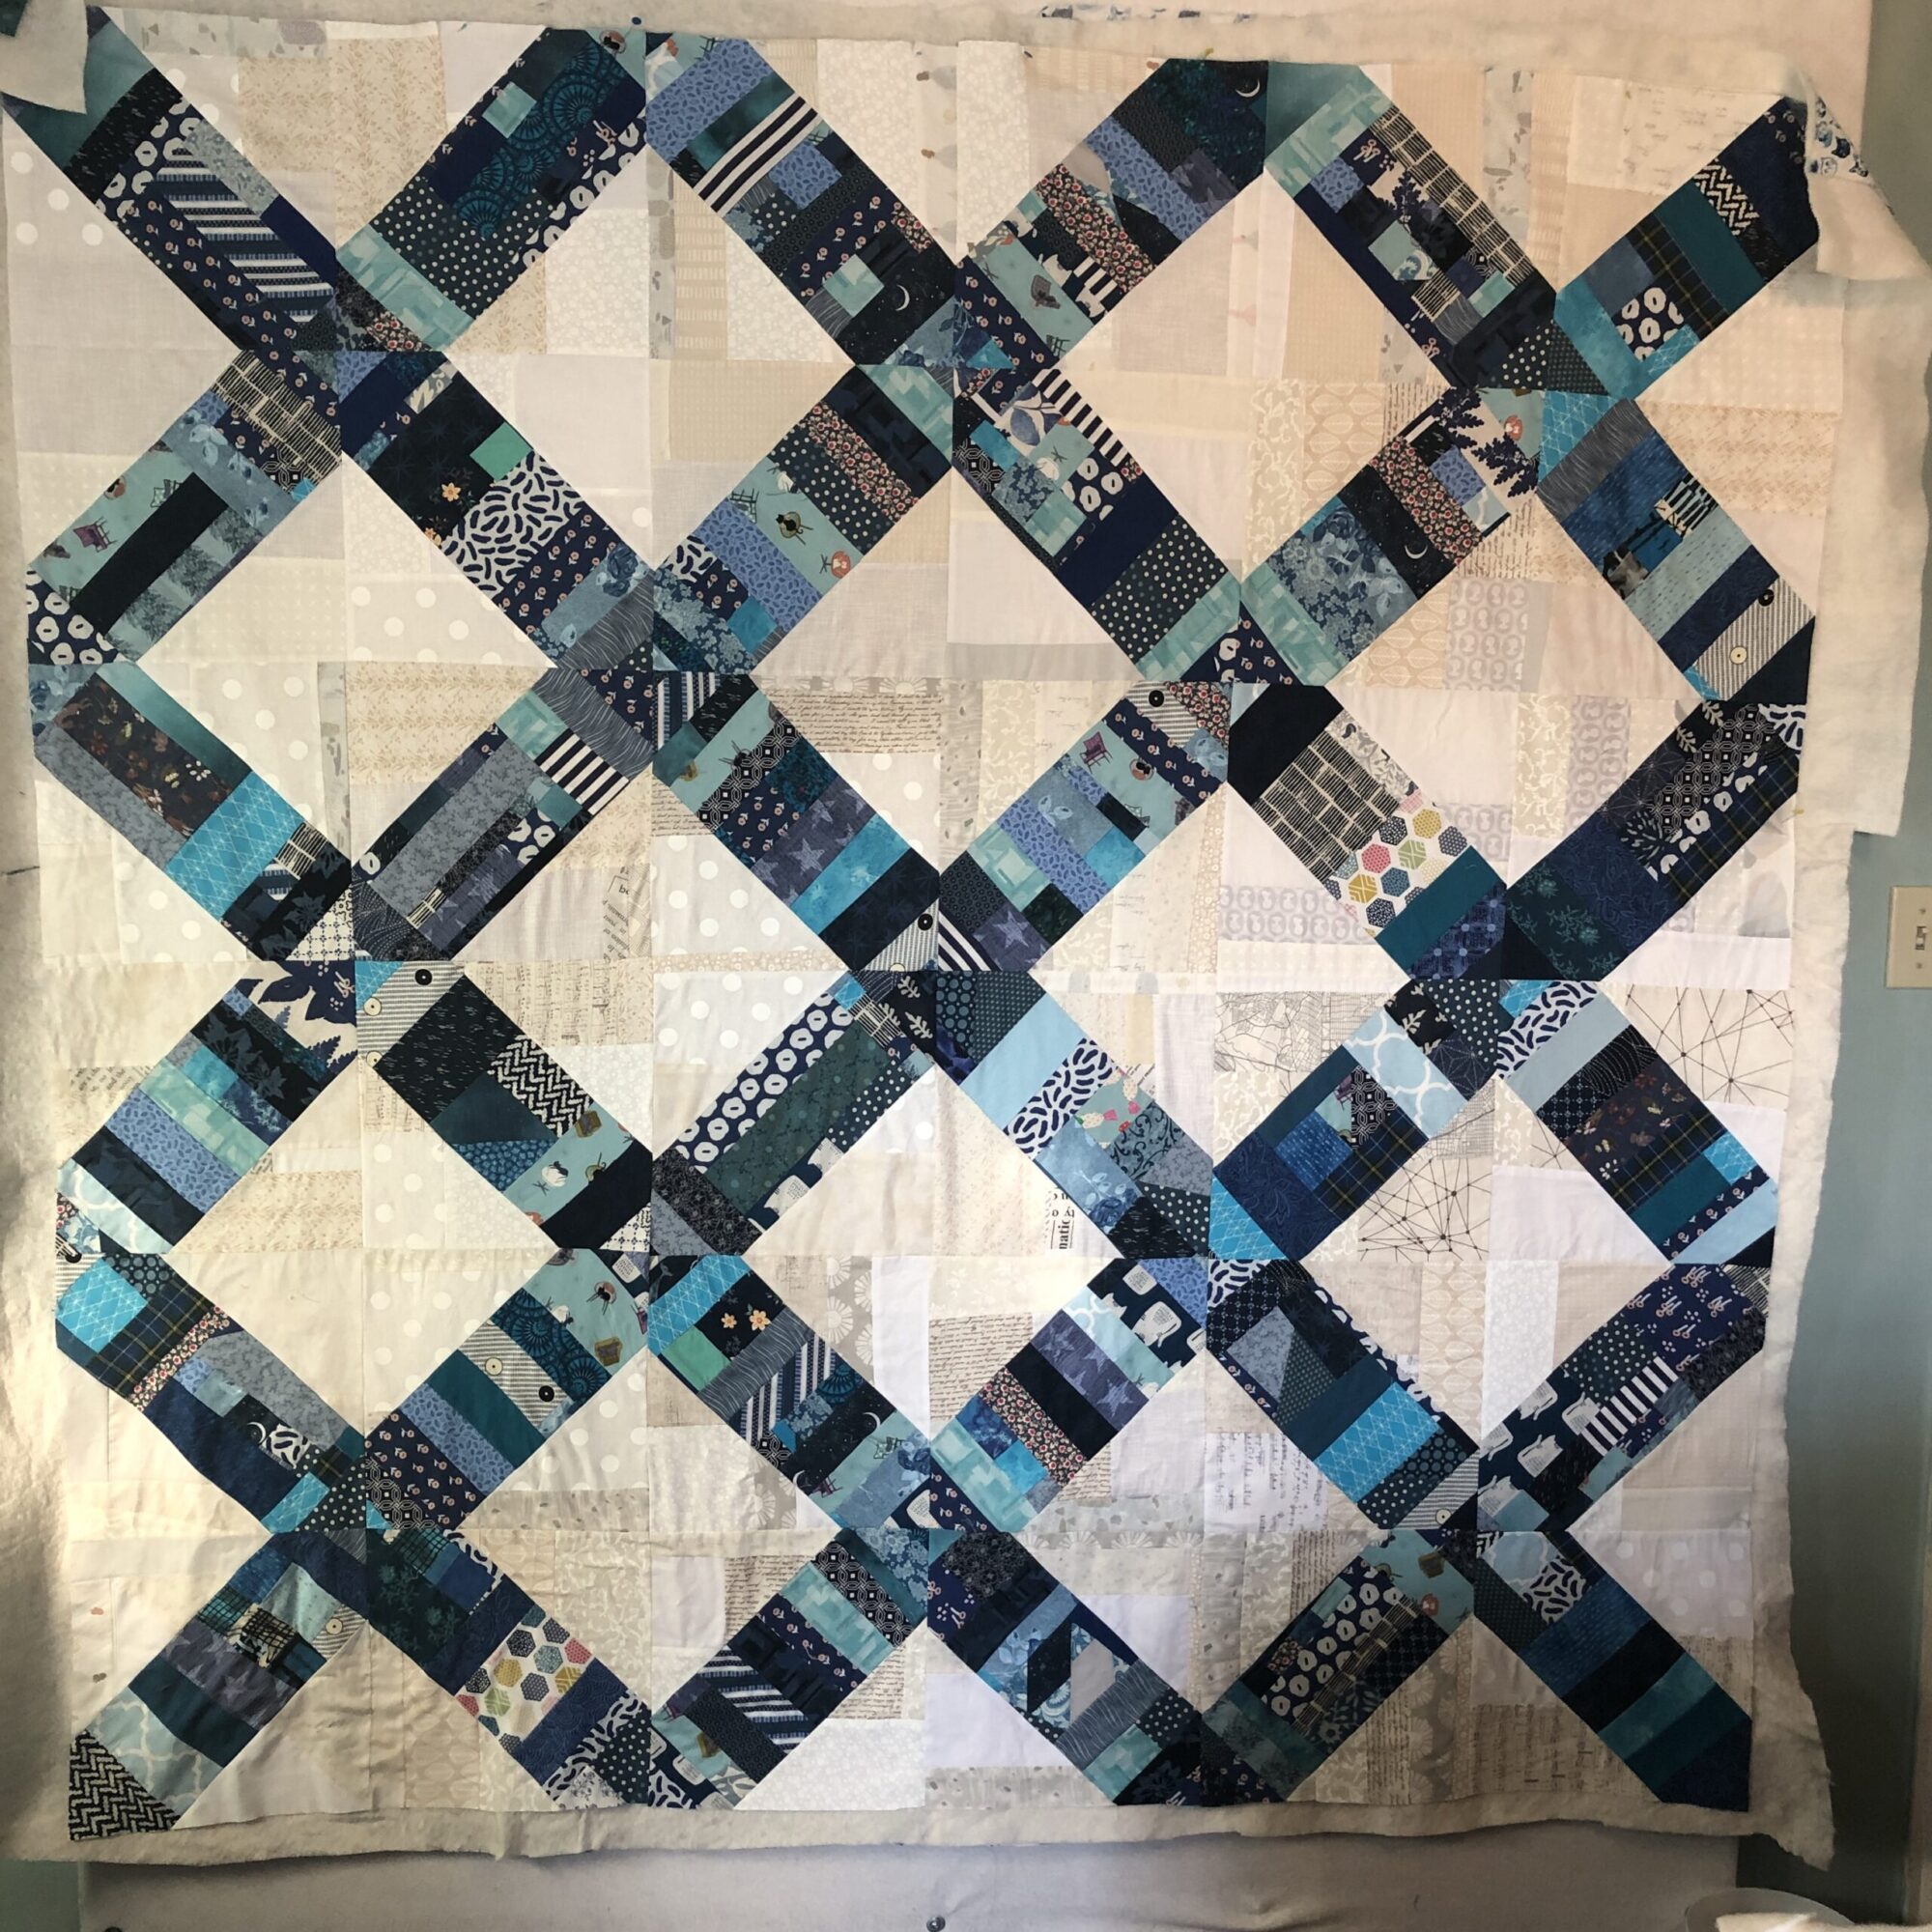 January Project Quilt – basting